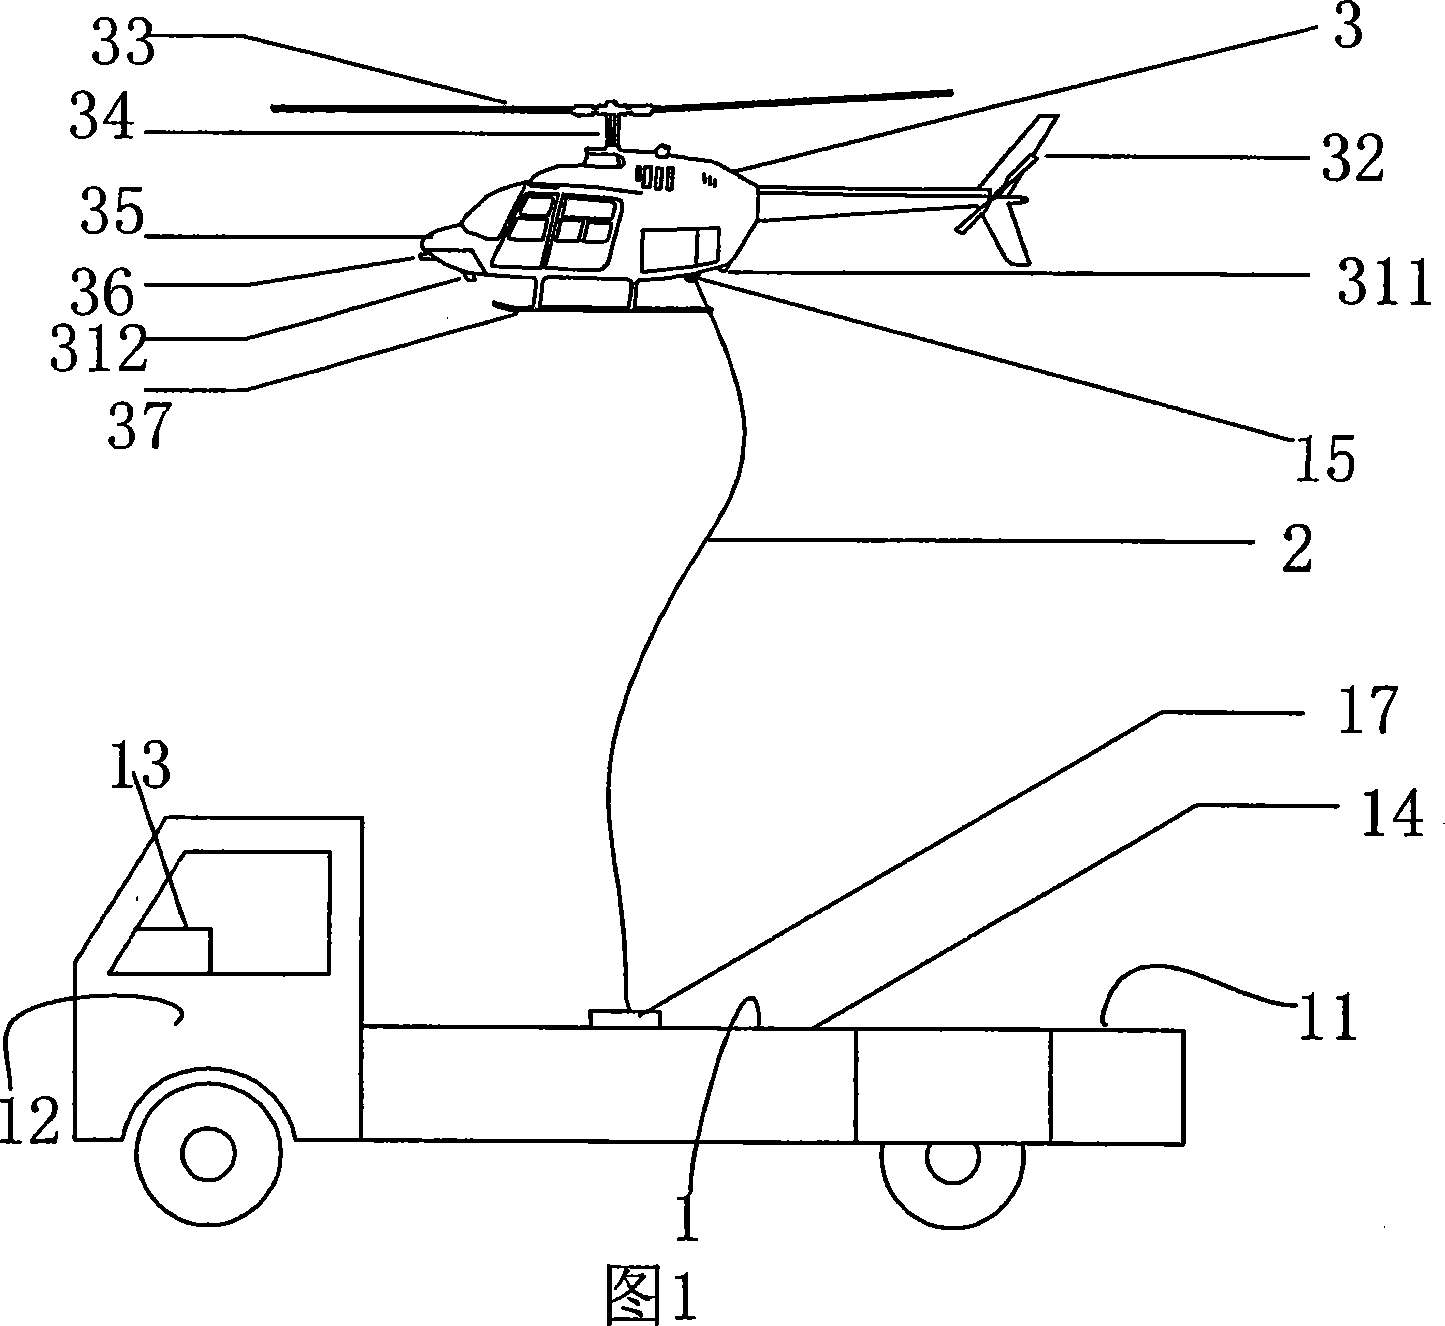 Vehicle-ship carrying electric lifter